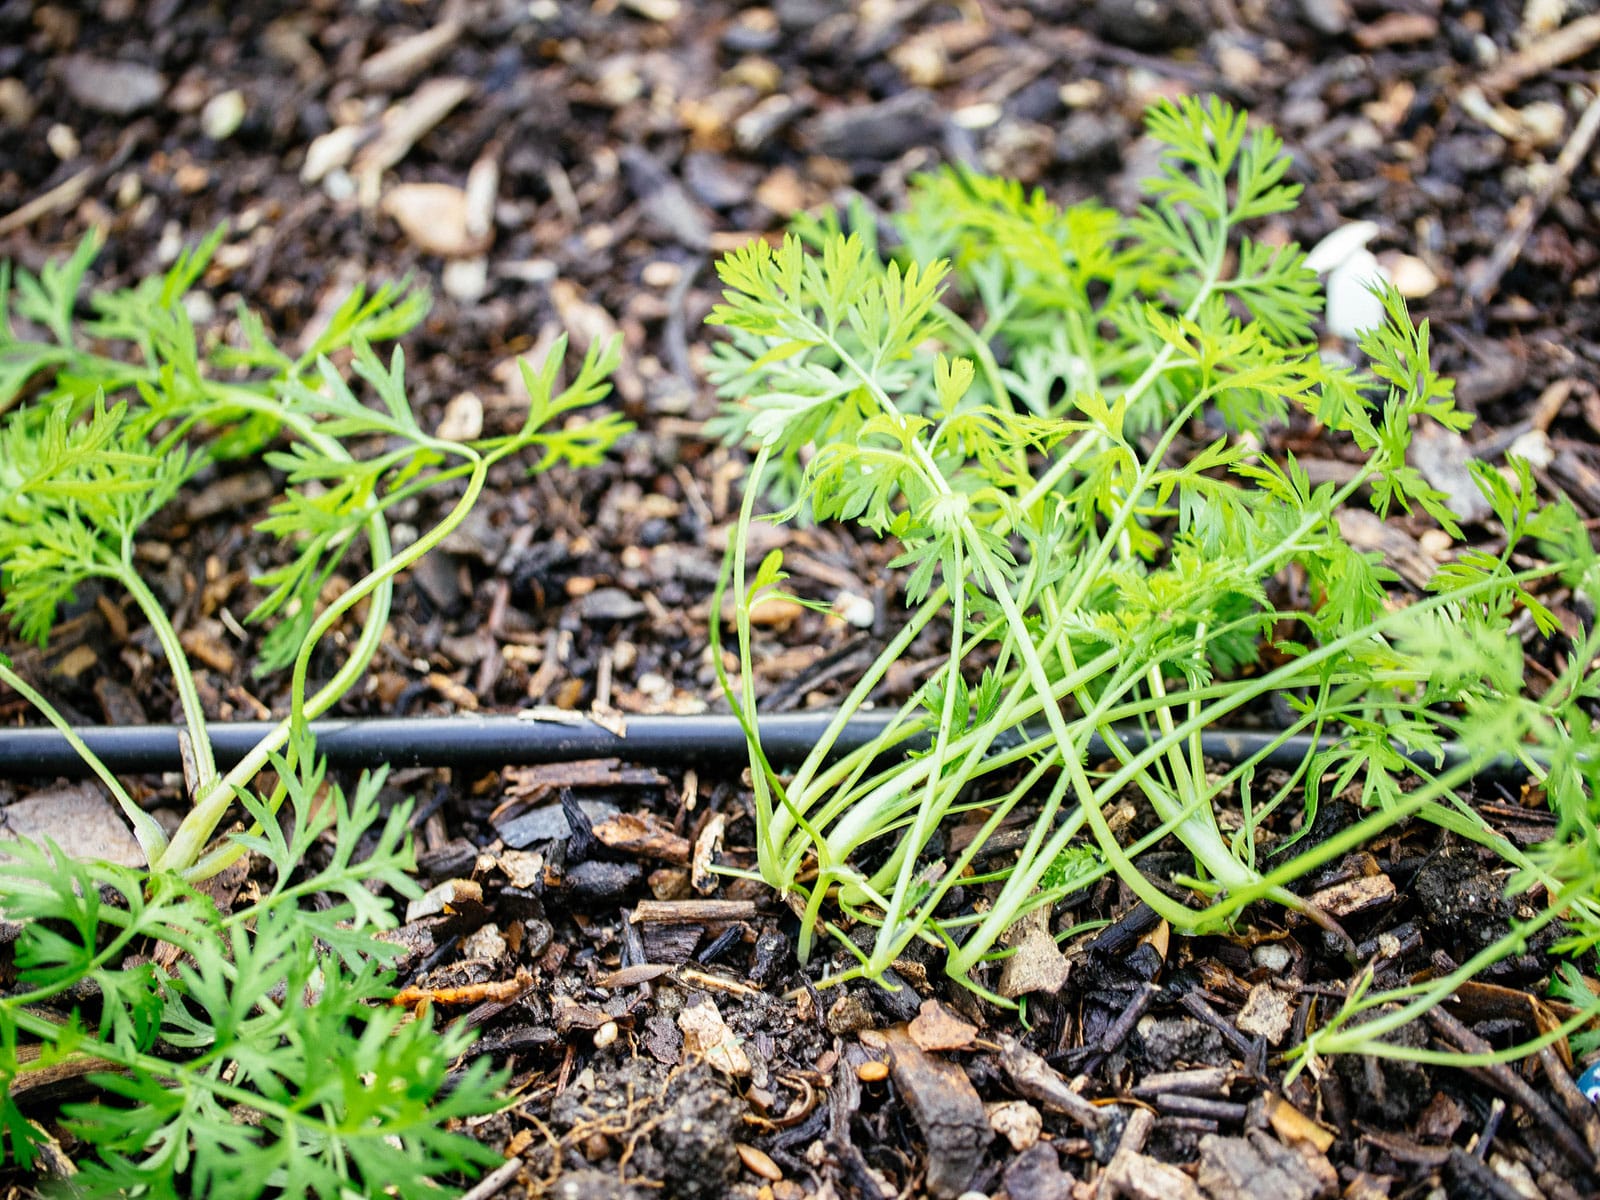 Carrot seedlings crowded together in a garden bed